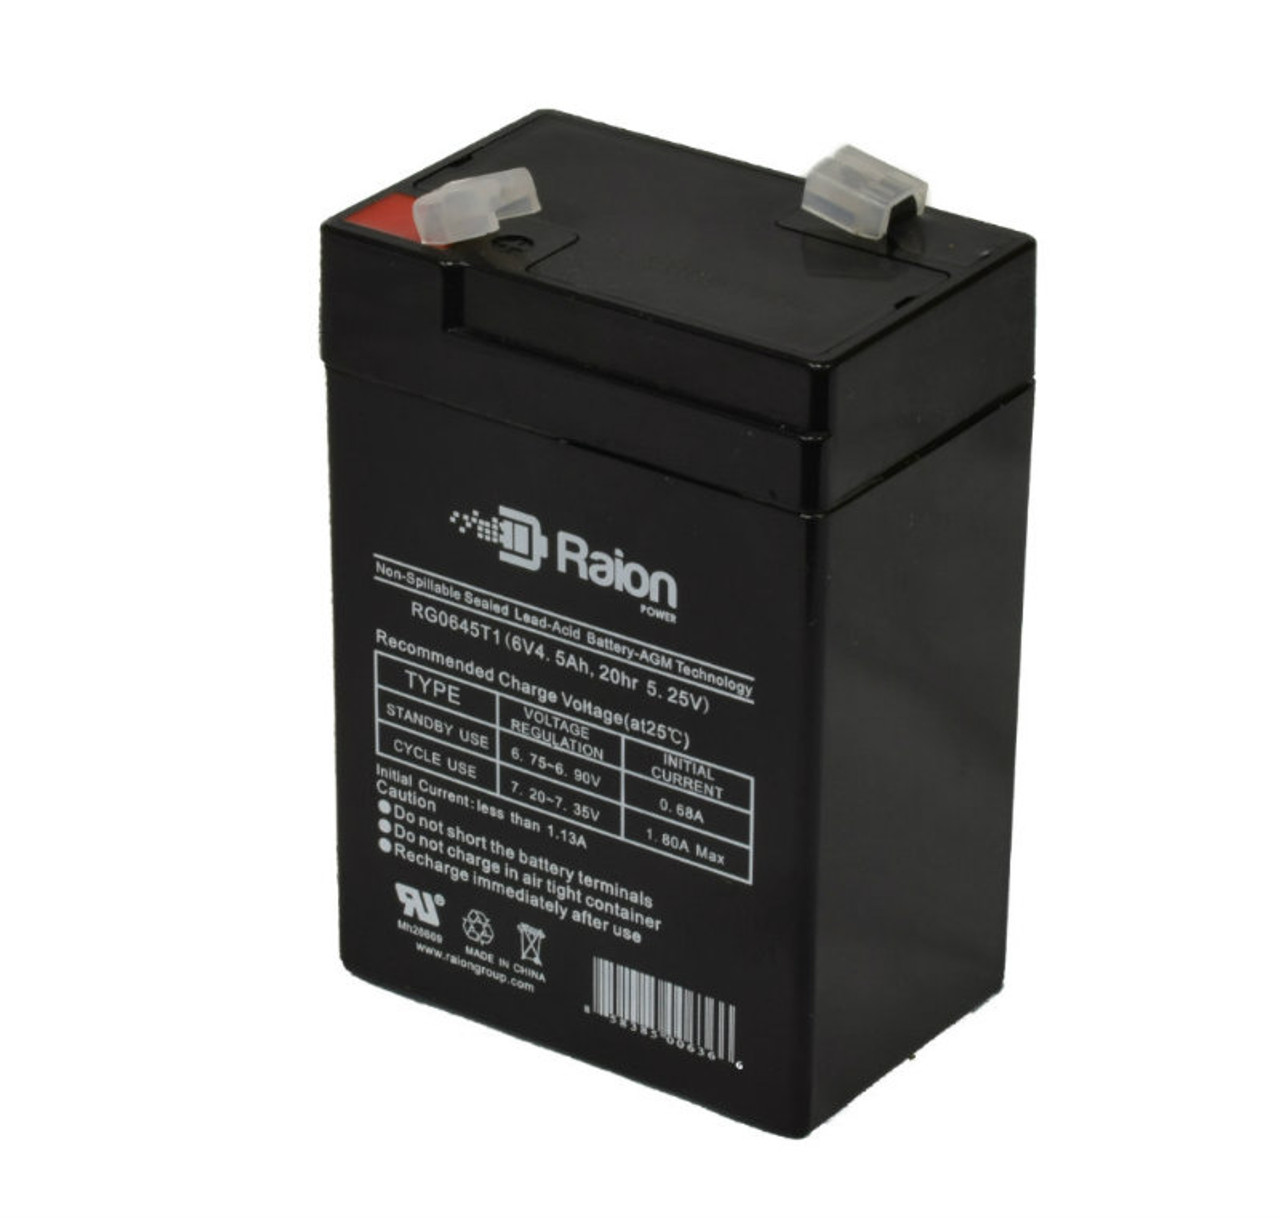 Raion Power RG0645T1 6V 4.5Ah Replacement Battery Cartridge for Light Alarms CE15BF